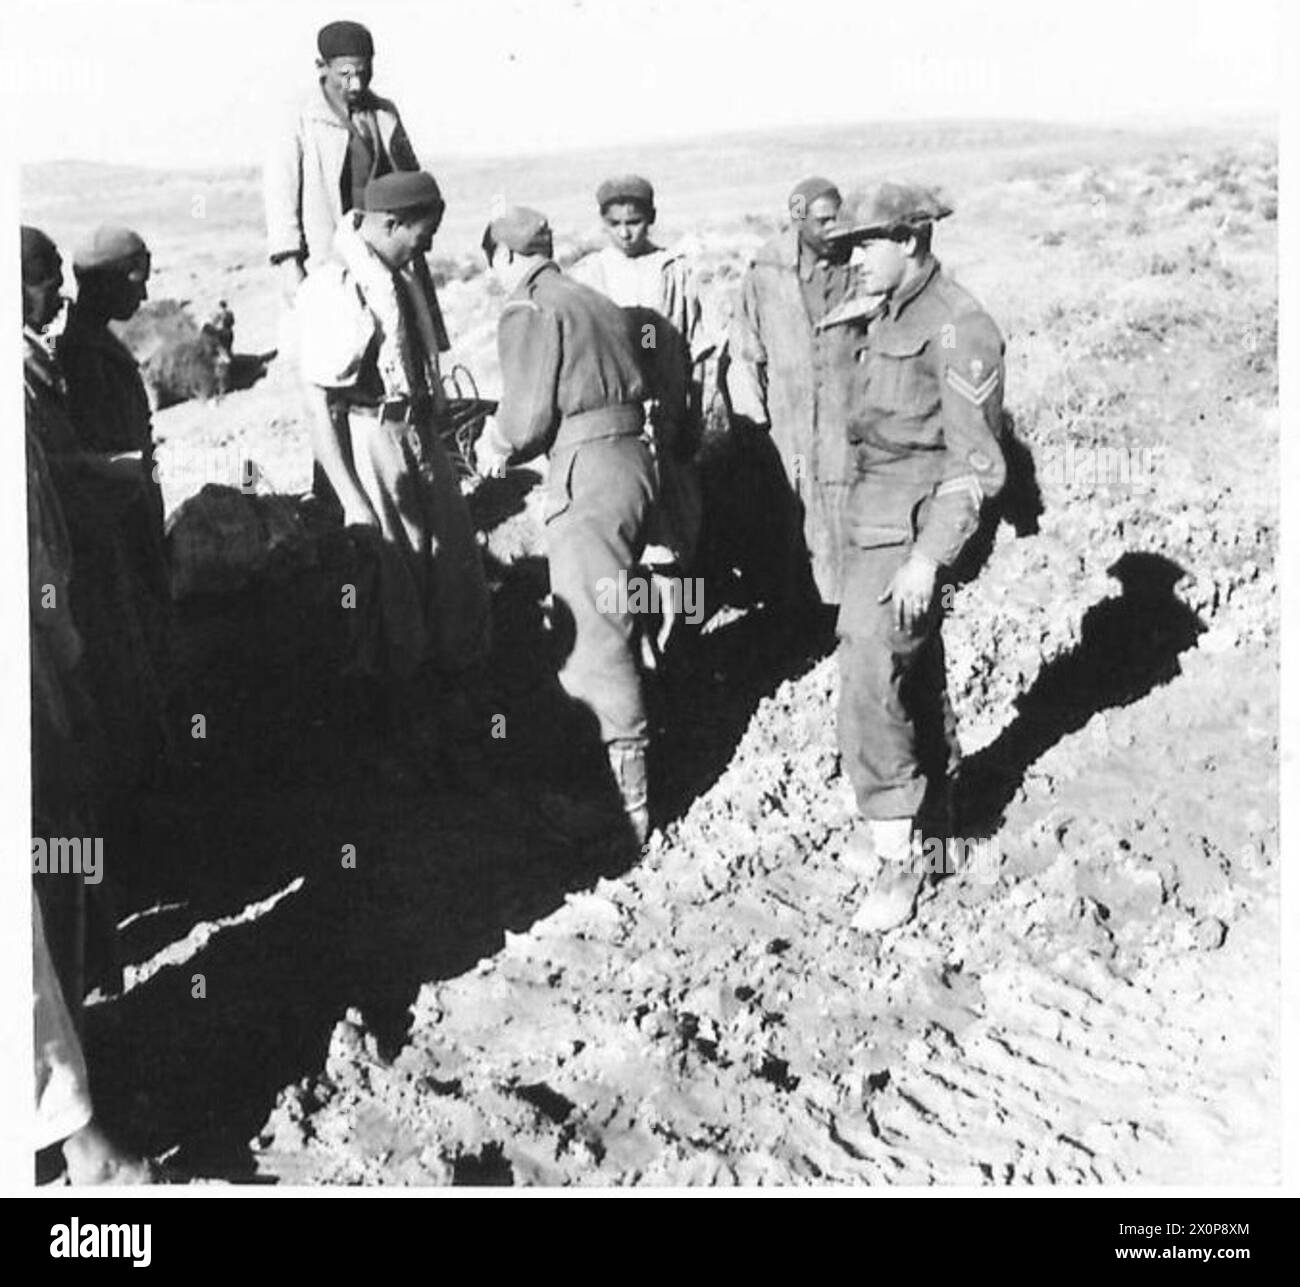 THE BRITISH ARMY IN THE TUNISIA CAMPAIGN, NOVEMBER 1942-MAY 1943 - Guardsmen of the 3rd Battalion, Grenadier Guards searching local Arabs in the frontline area near Medjez el Bab, December 1942. The soldier with his back to the camera is Drum Major Watling British Army, British Army, 1st Army, British Army, Grenadier Guards, British Army, Grenadier Guards, 3rd Battalion Stock Photo